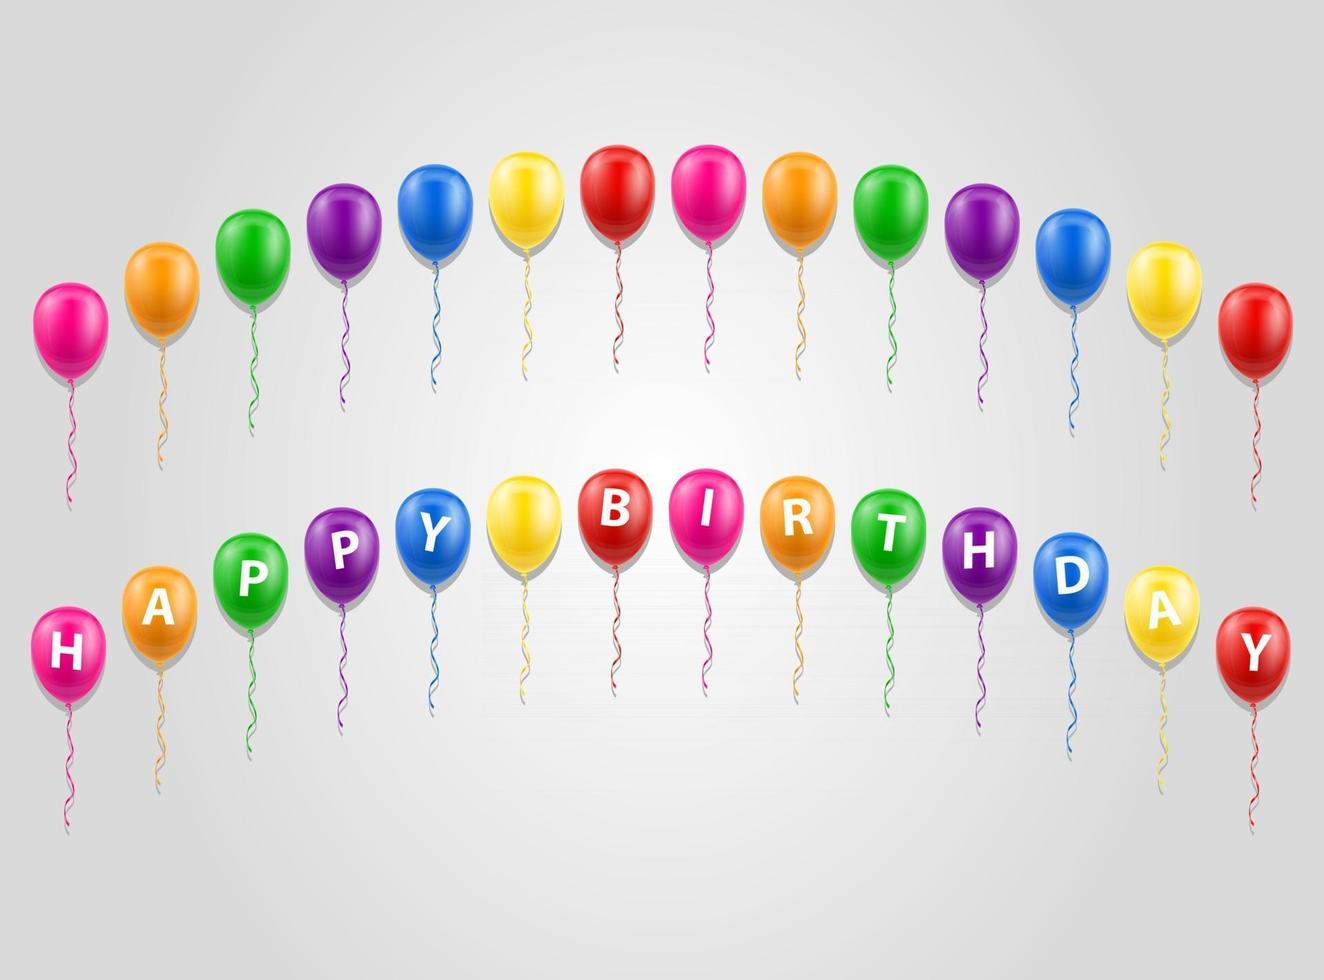 happy birthday inscription text stock vector illustration isolated on white background